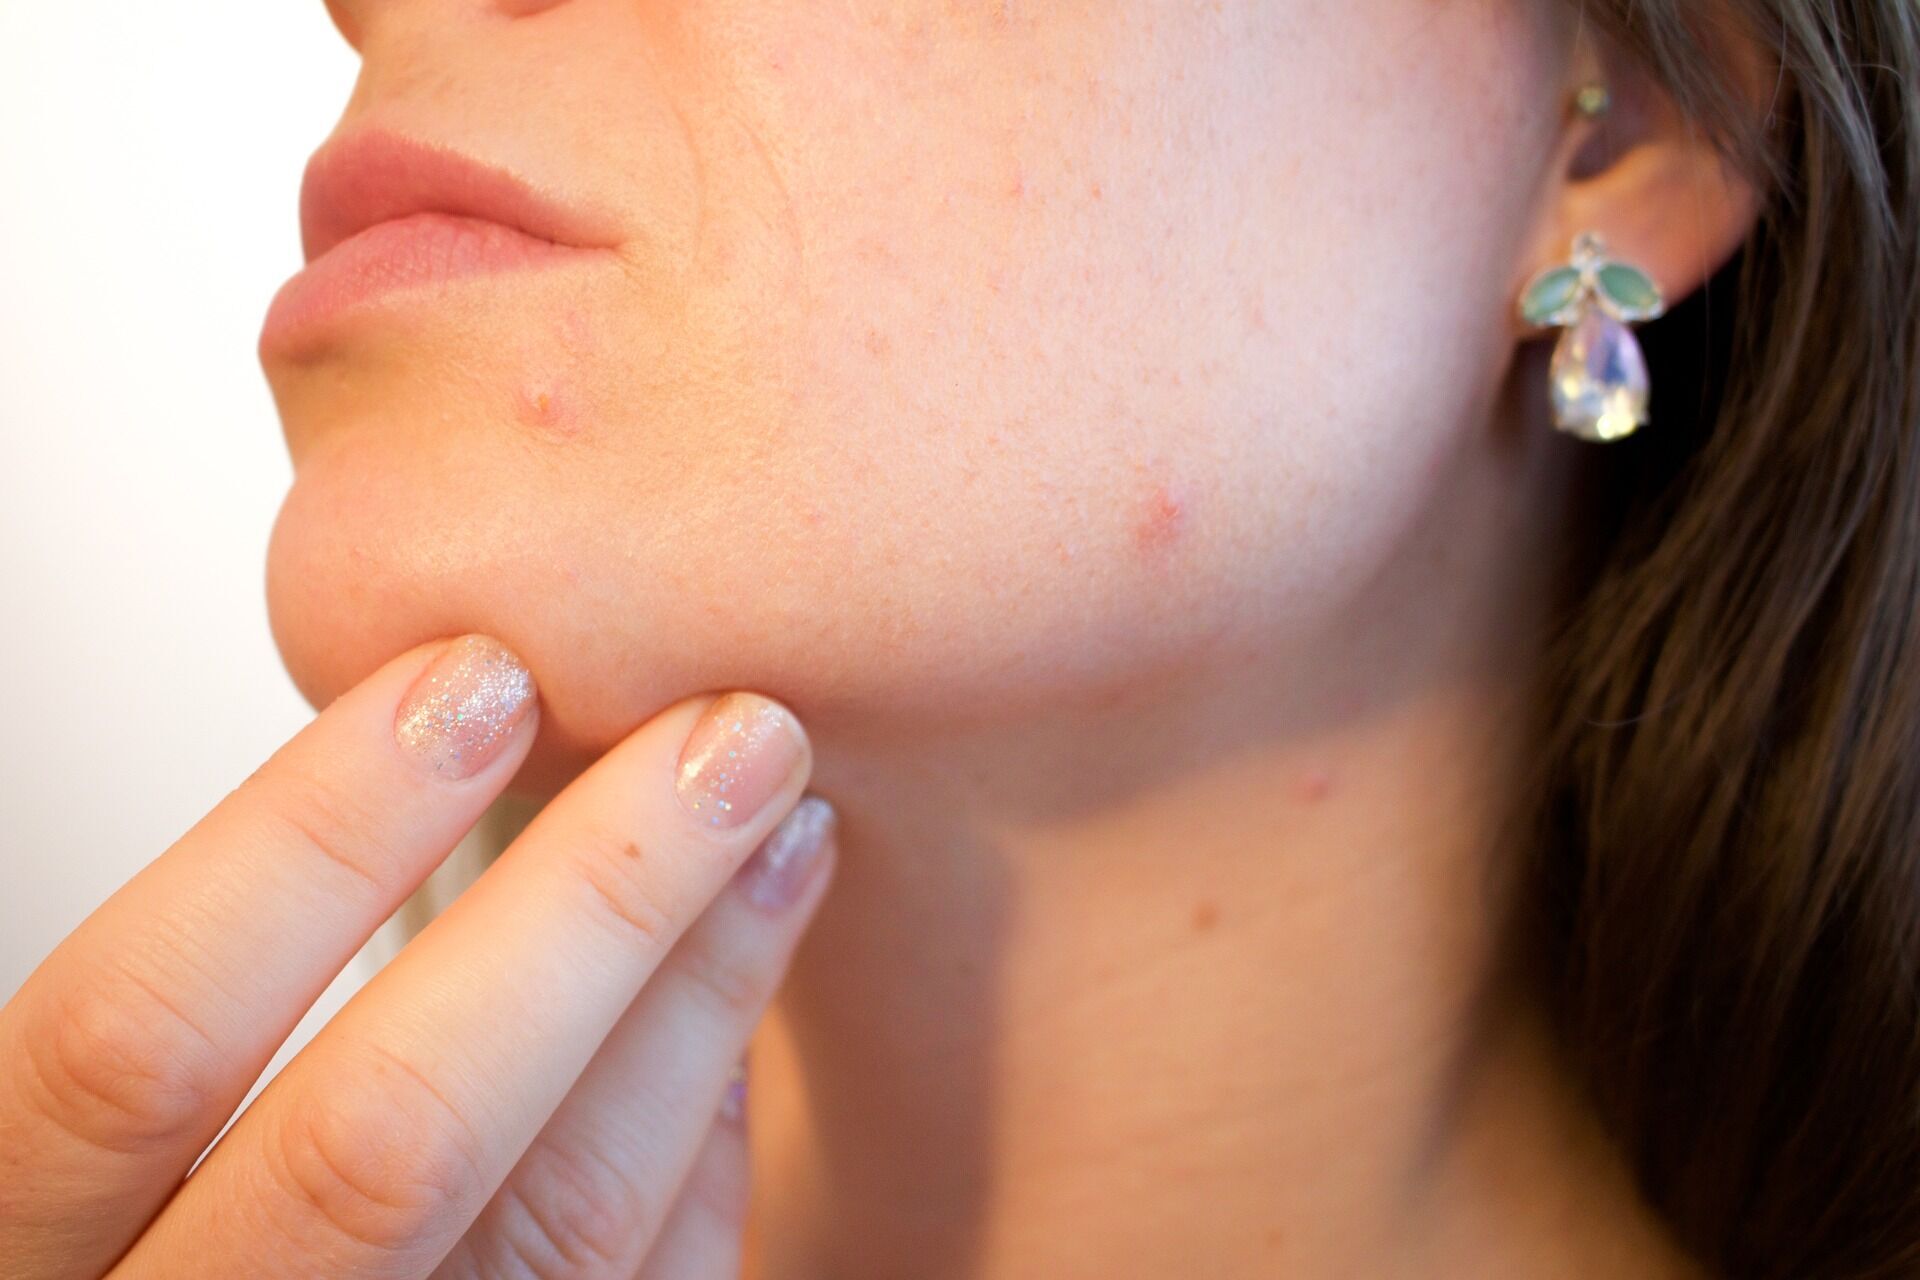 An abundance of cosmetics can lead to inflammation